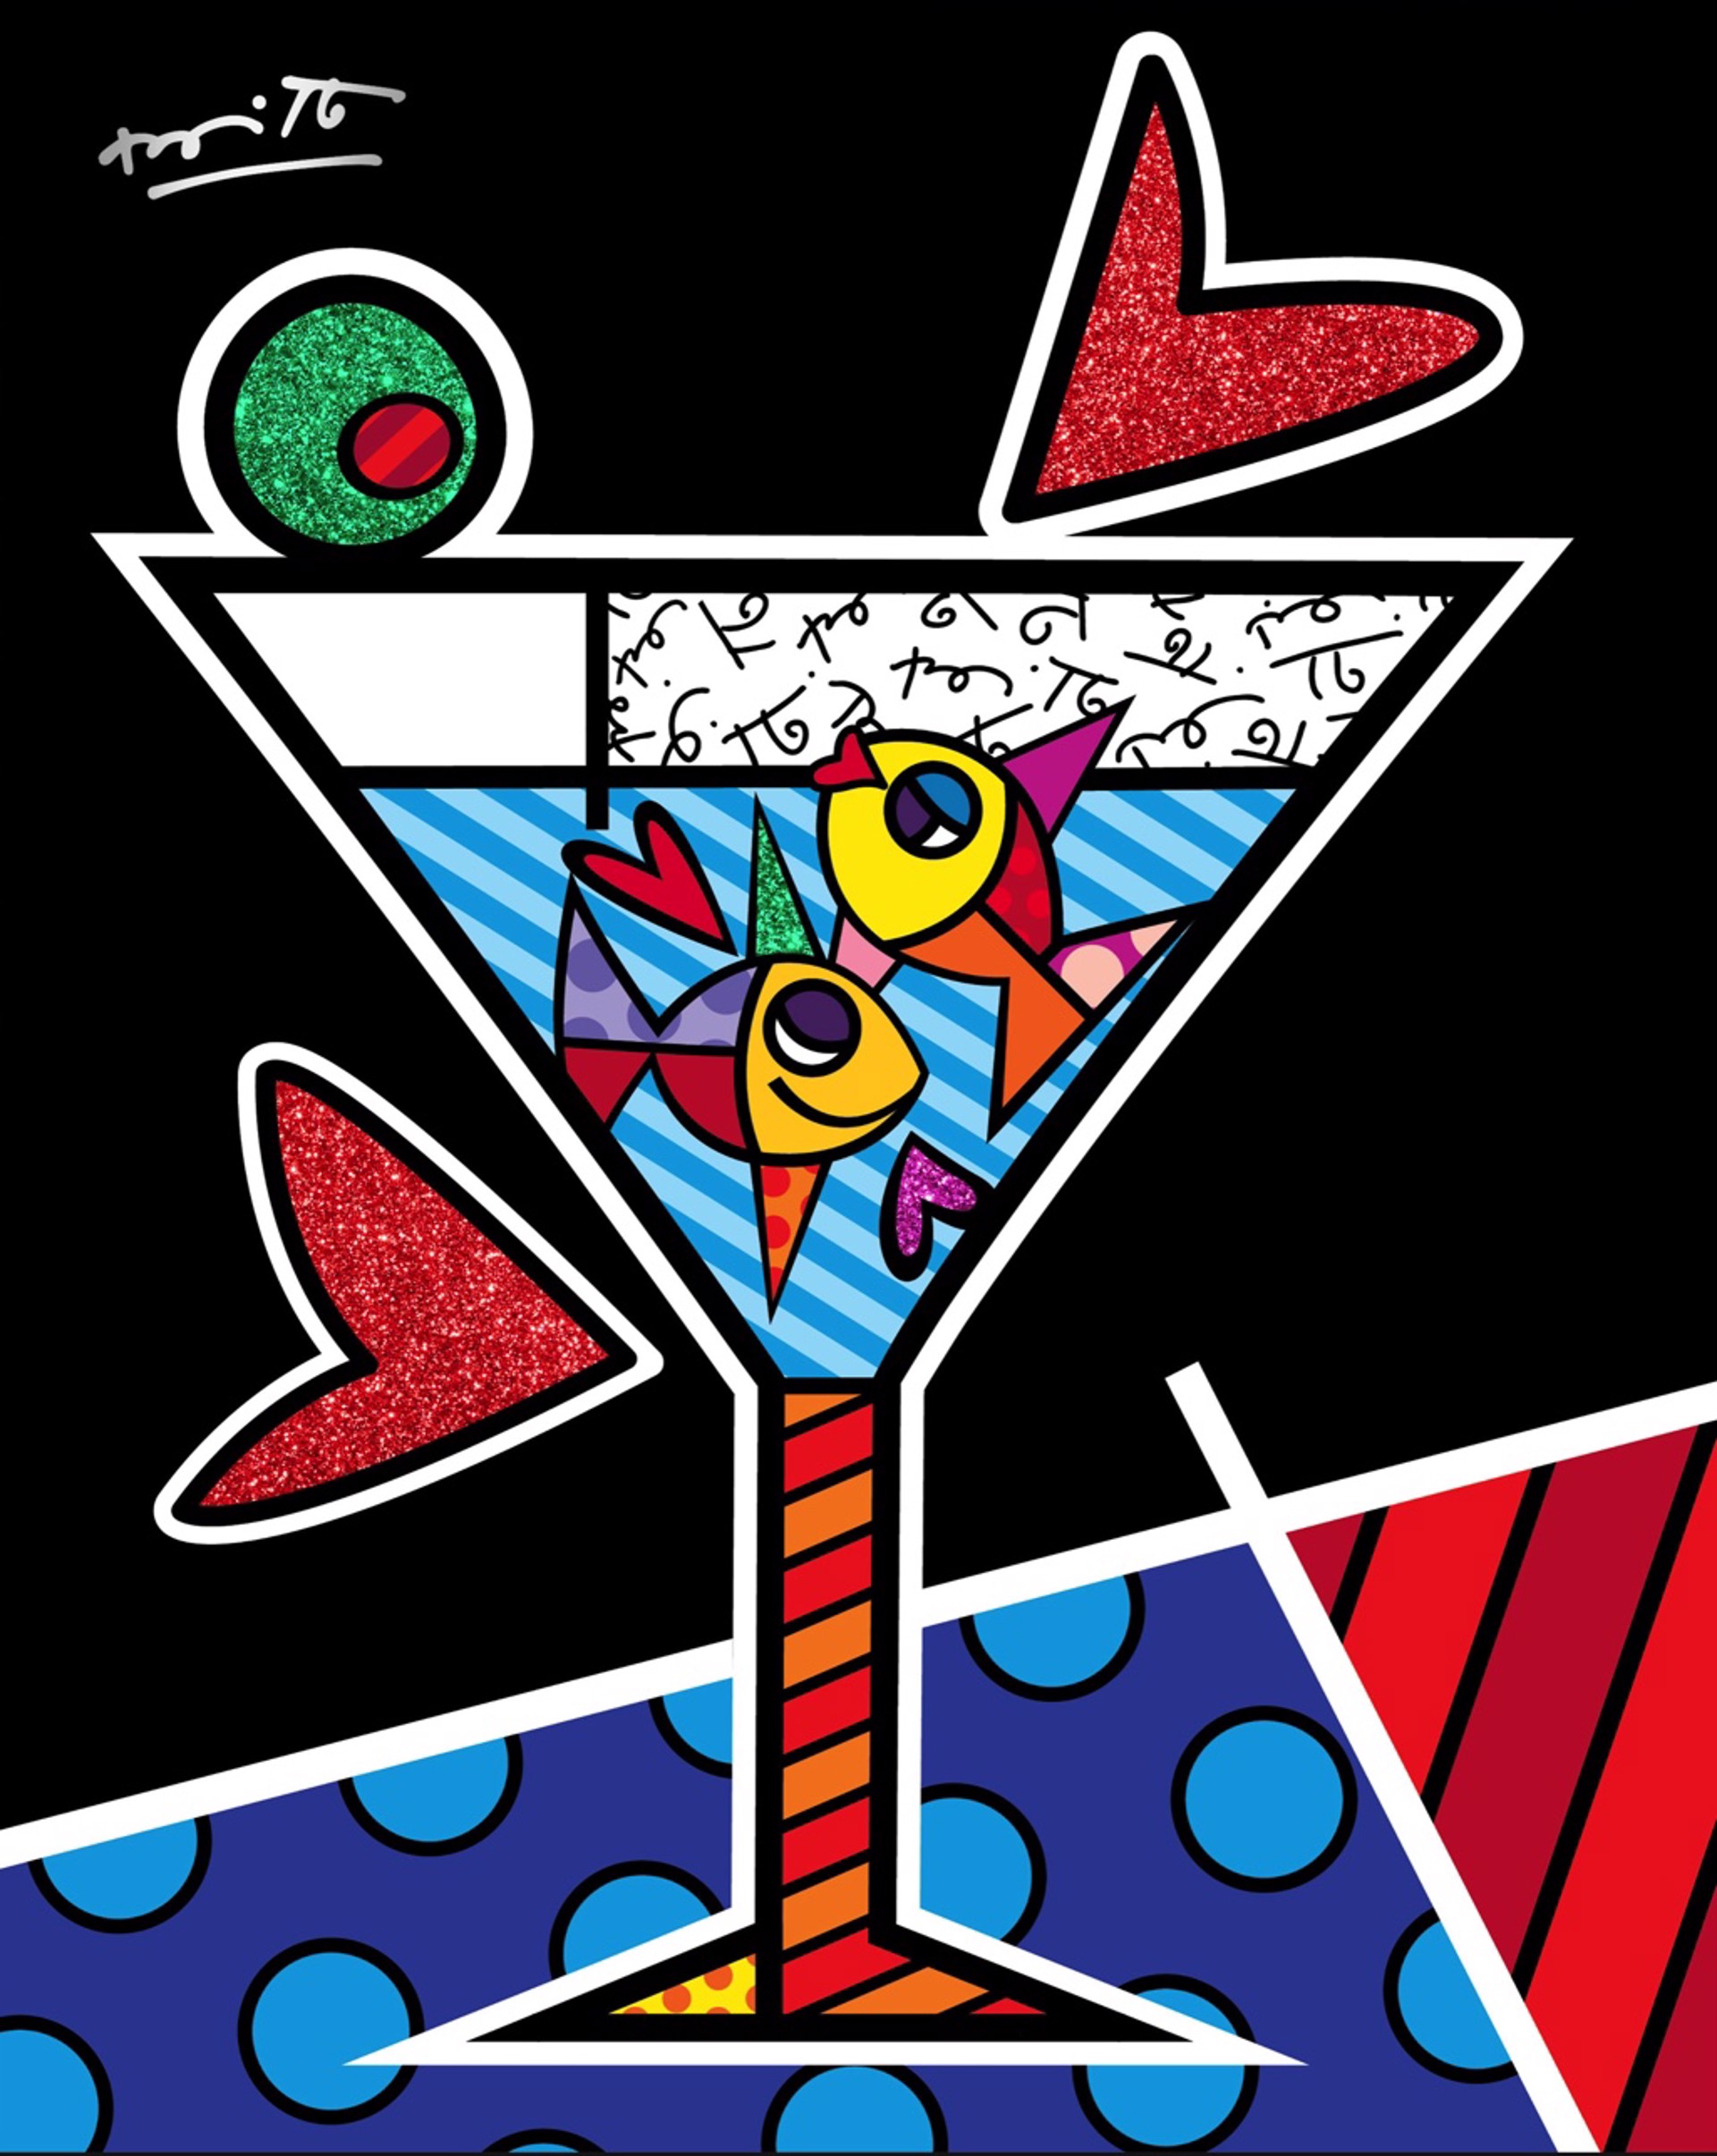 Cheers to Love by Romero Britto